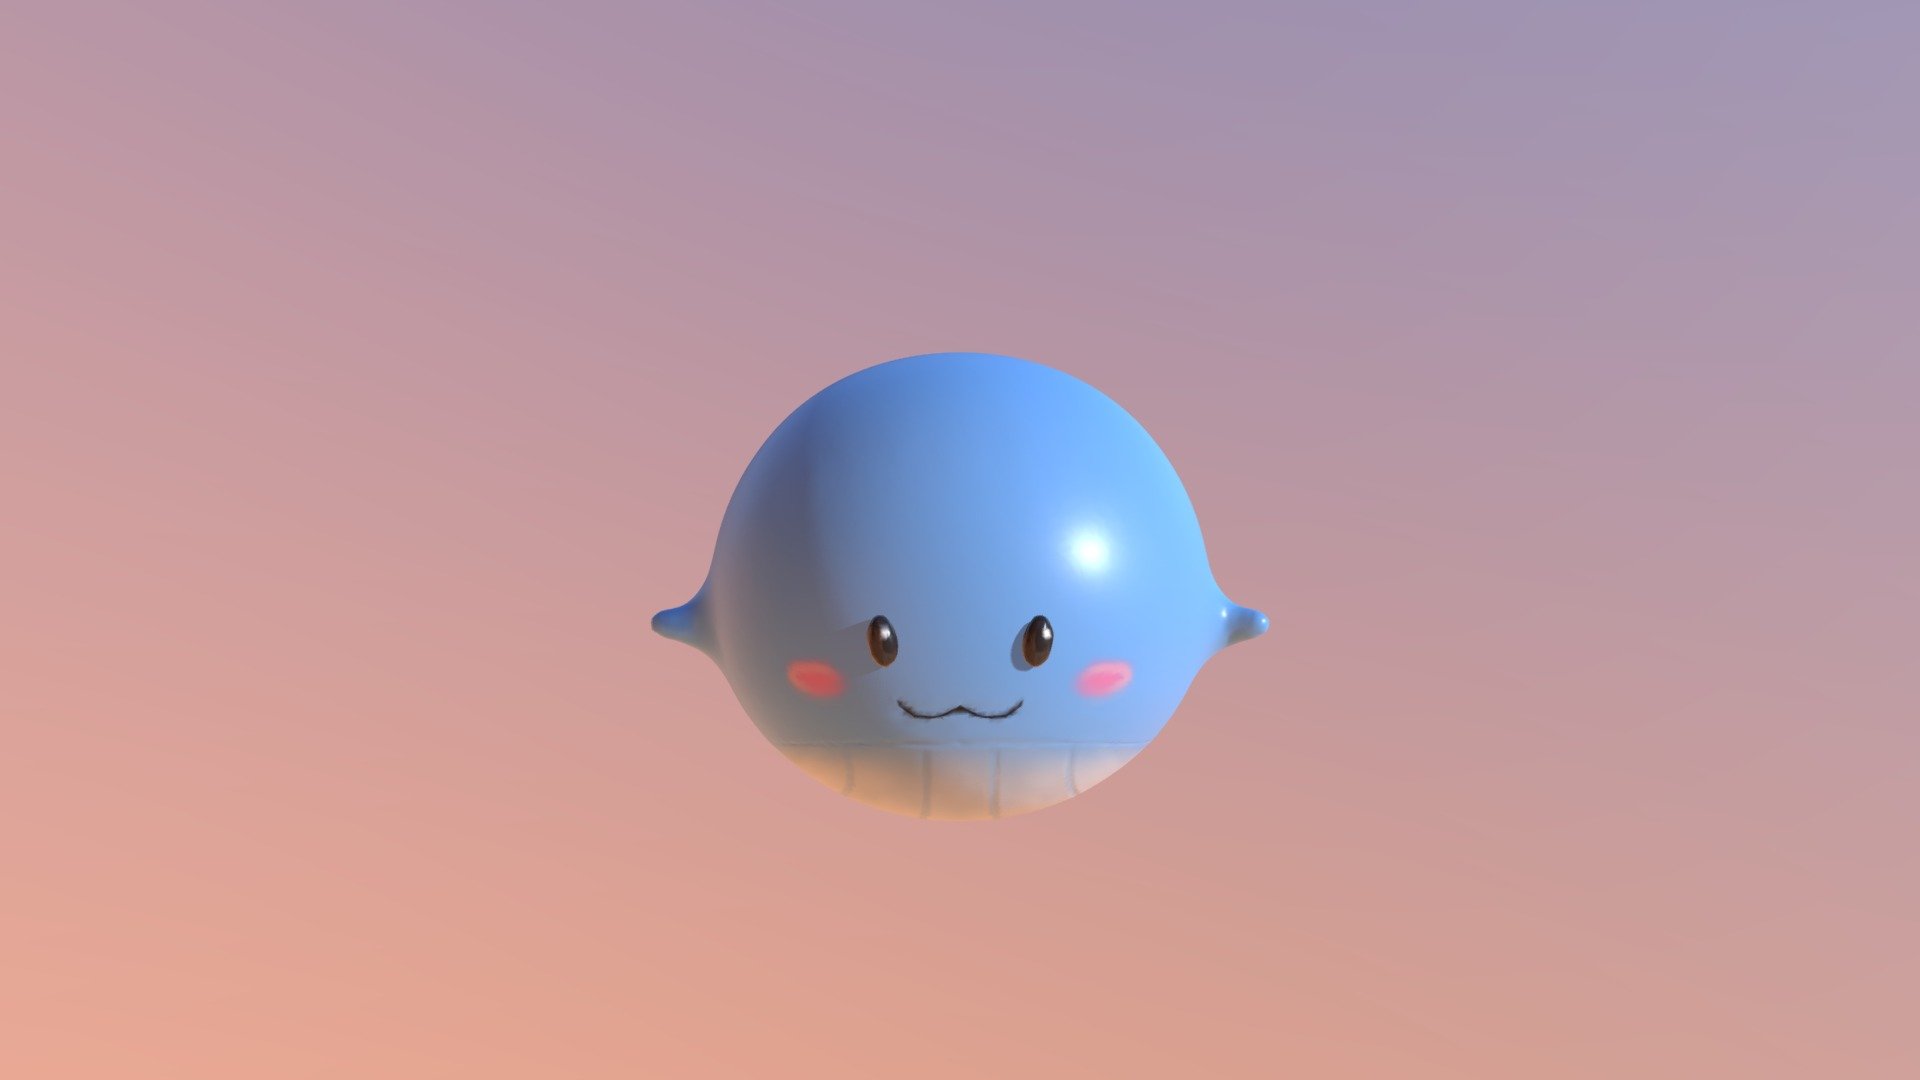 Whale did in class! - Cute Whale Low Poly - 3D model by lwhgamer 3d model